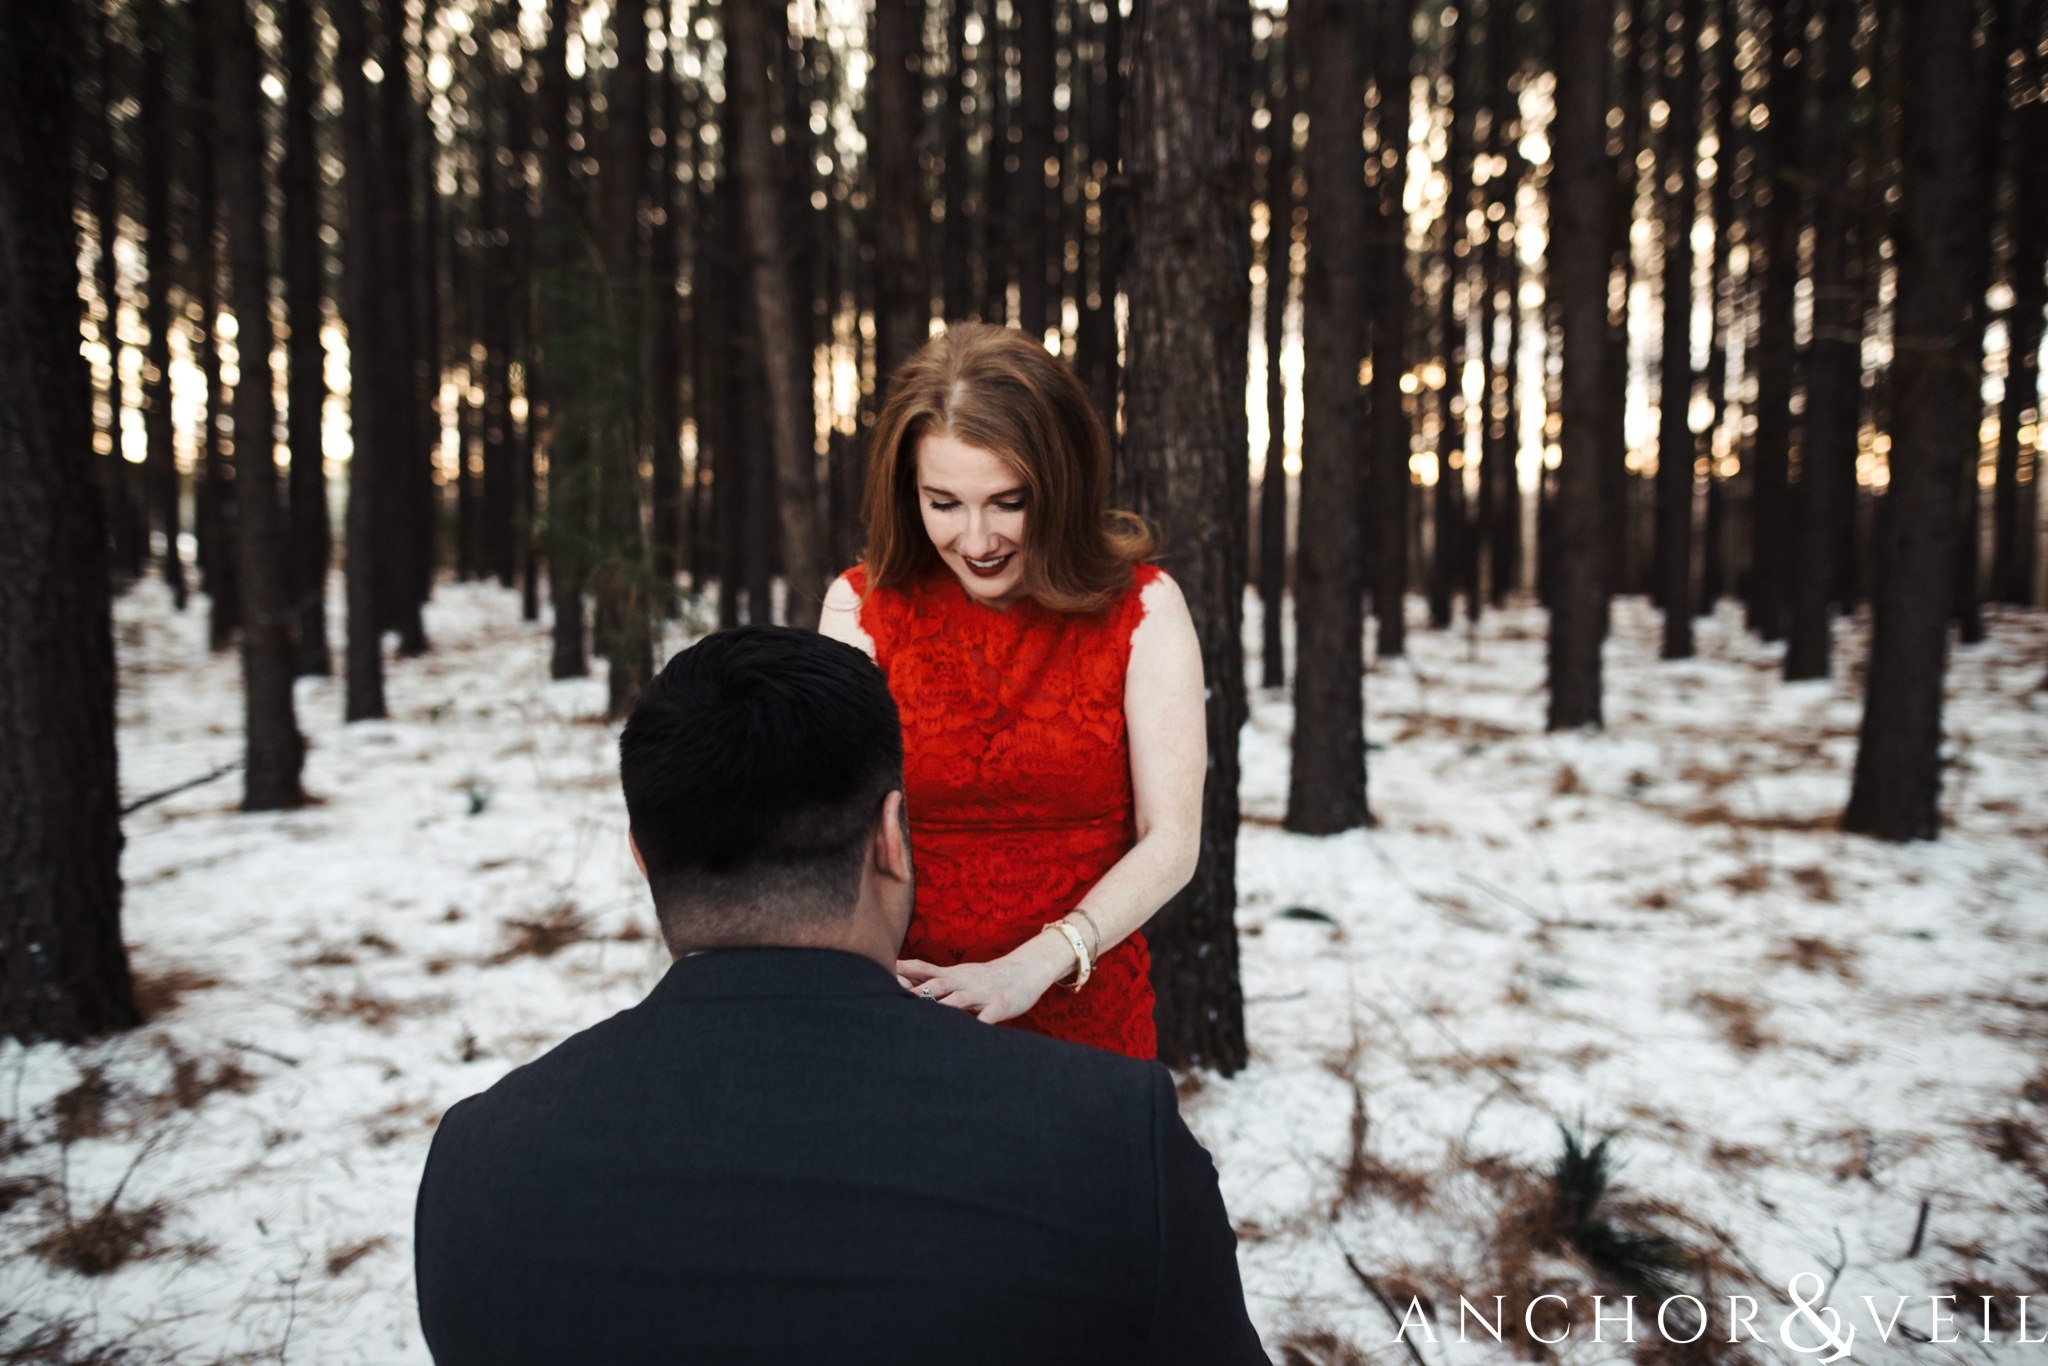 on his knee during their Charlotte Snow engagement session in the woods